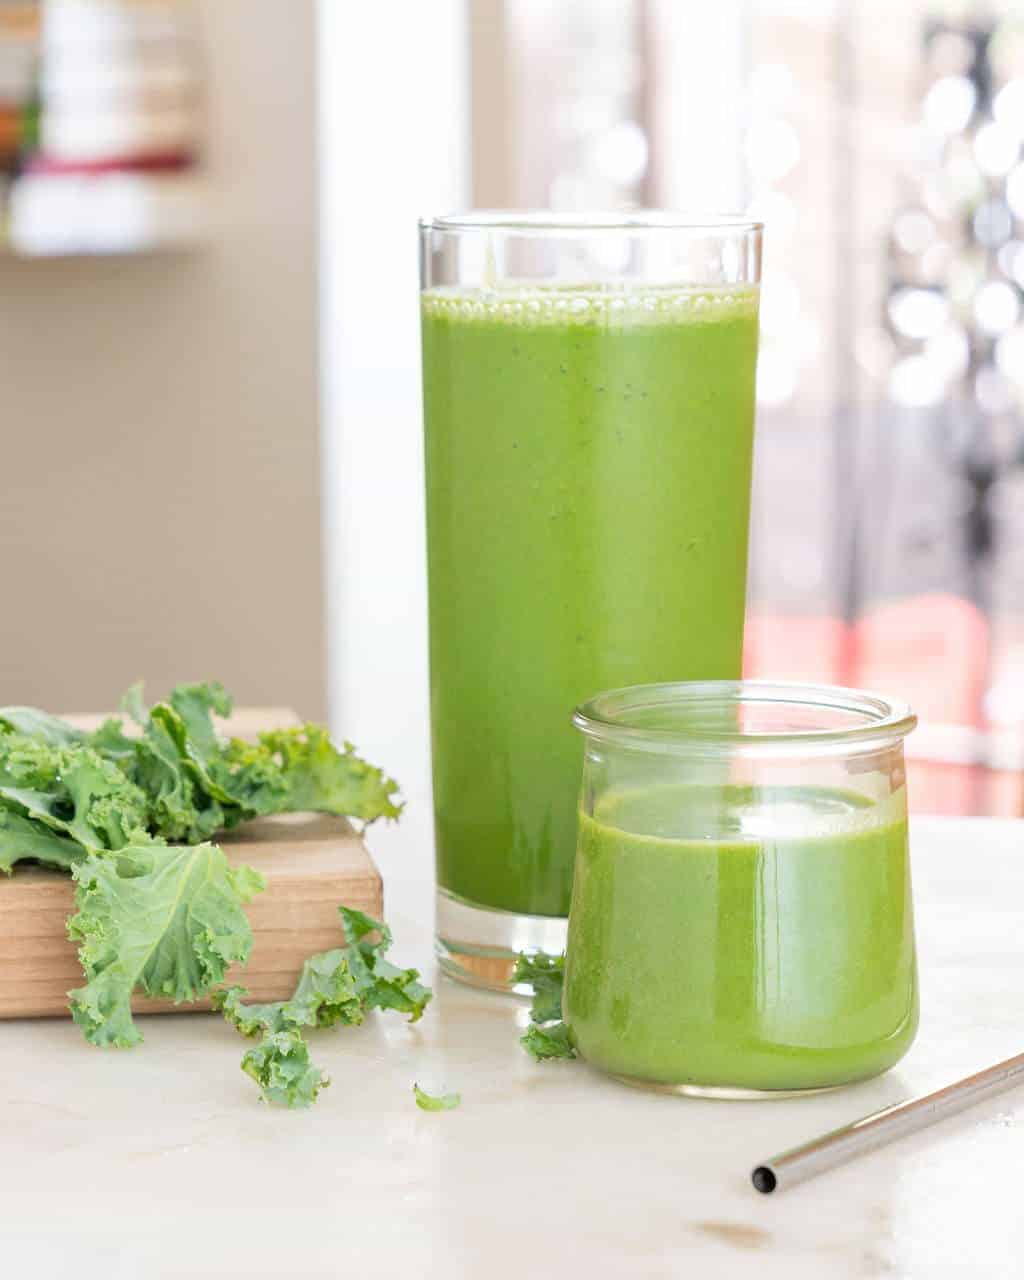 Two glasses of bright green banana kale smoothie on a counter.